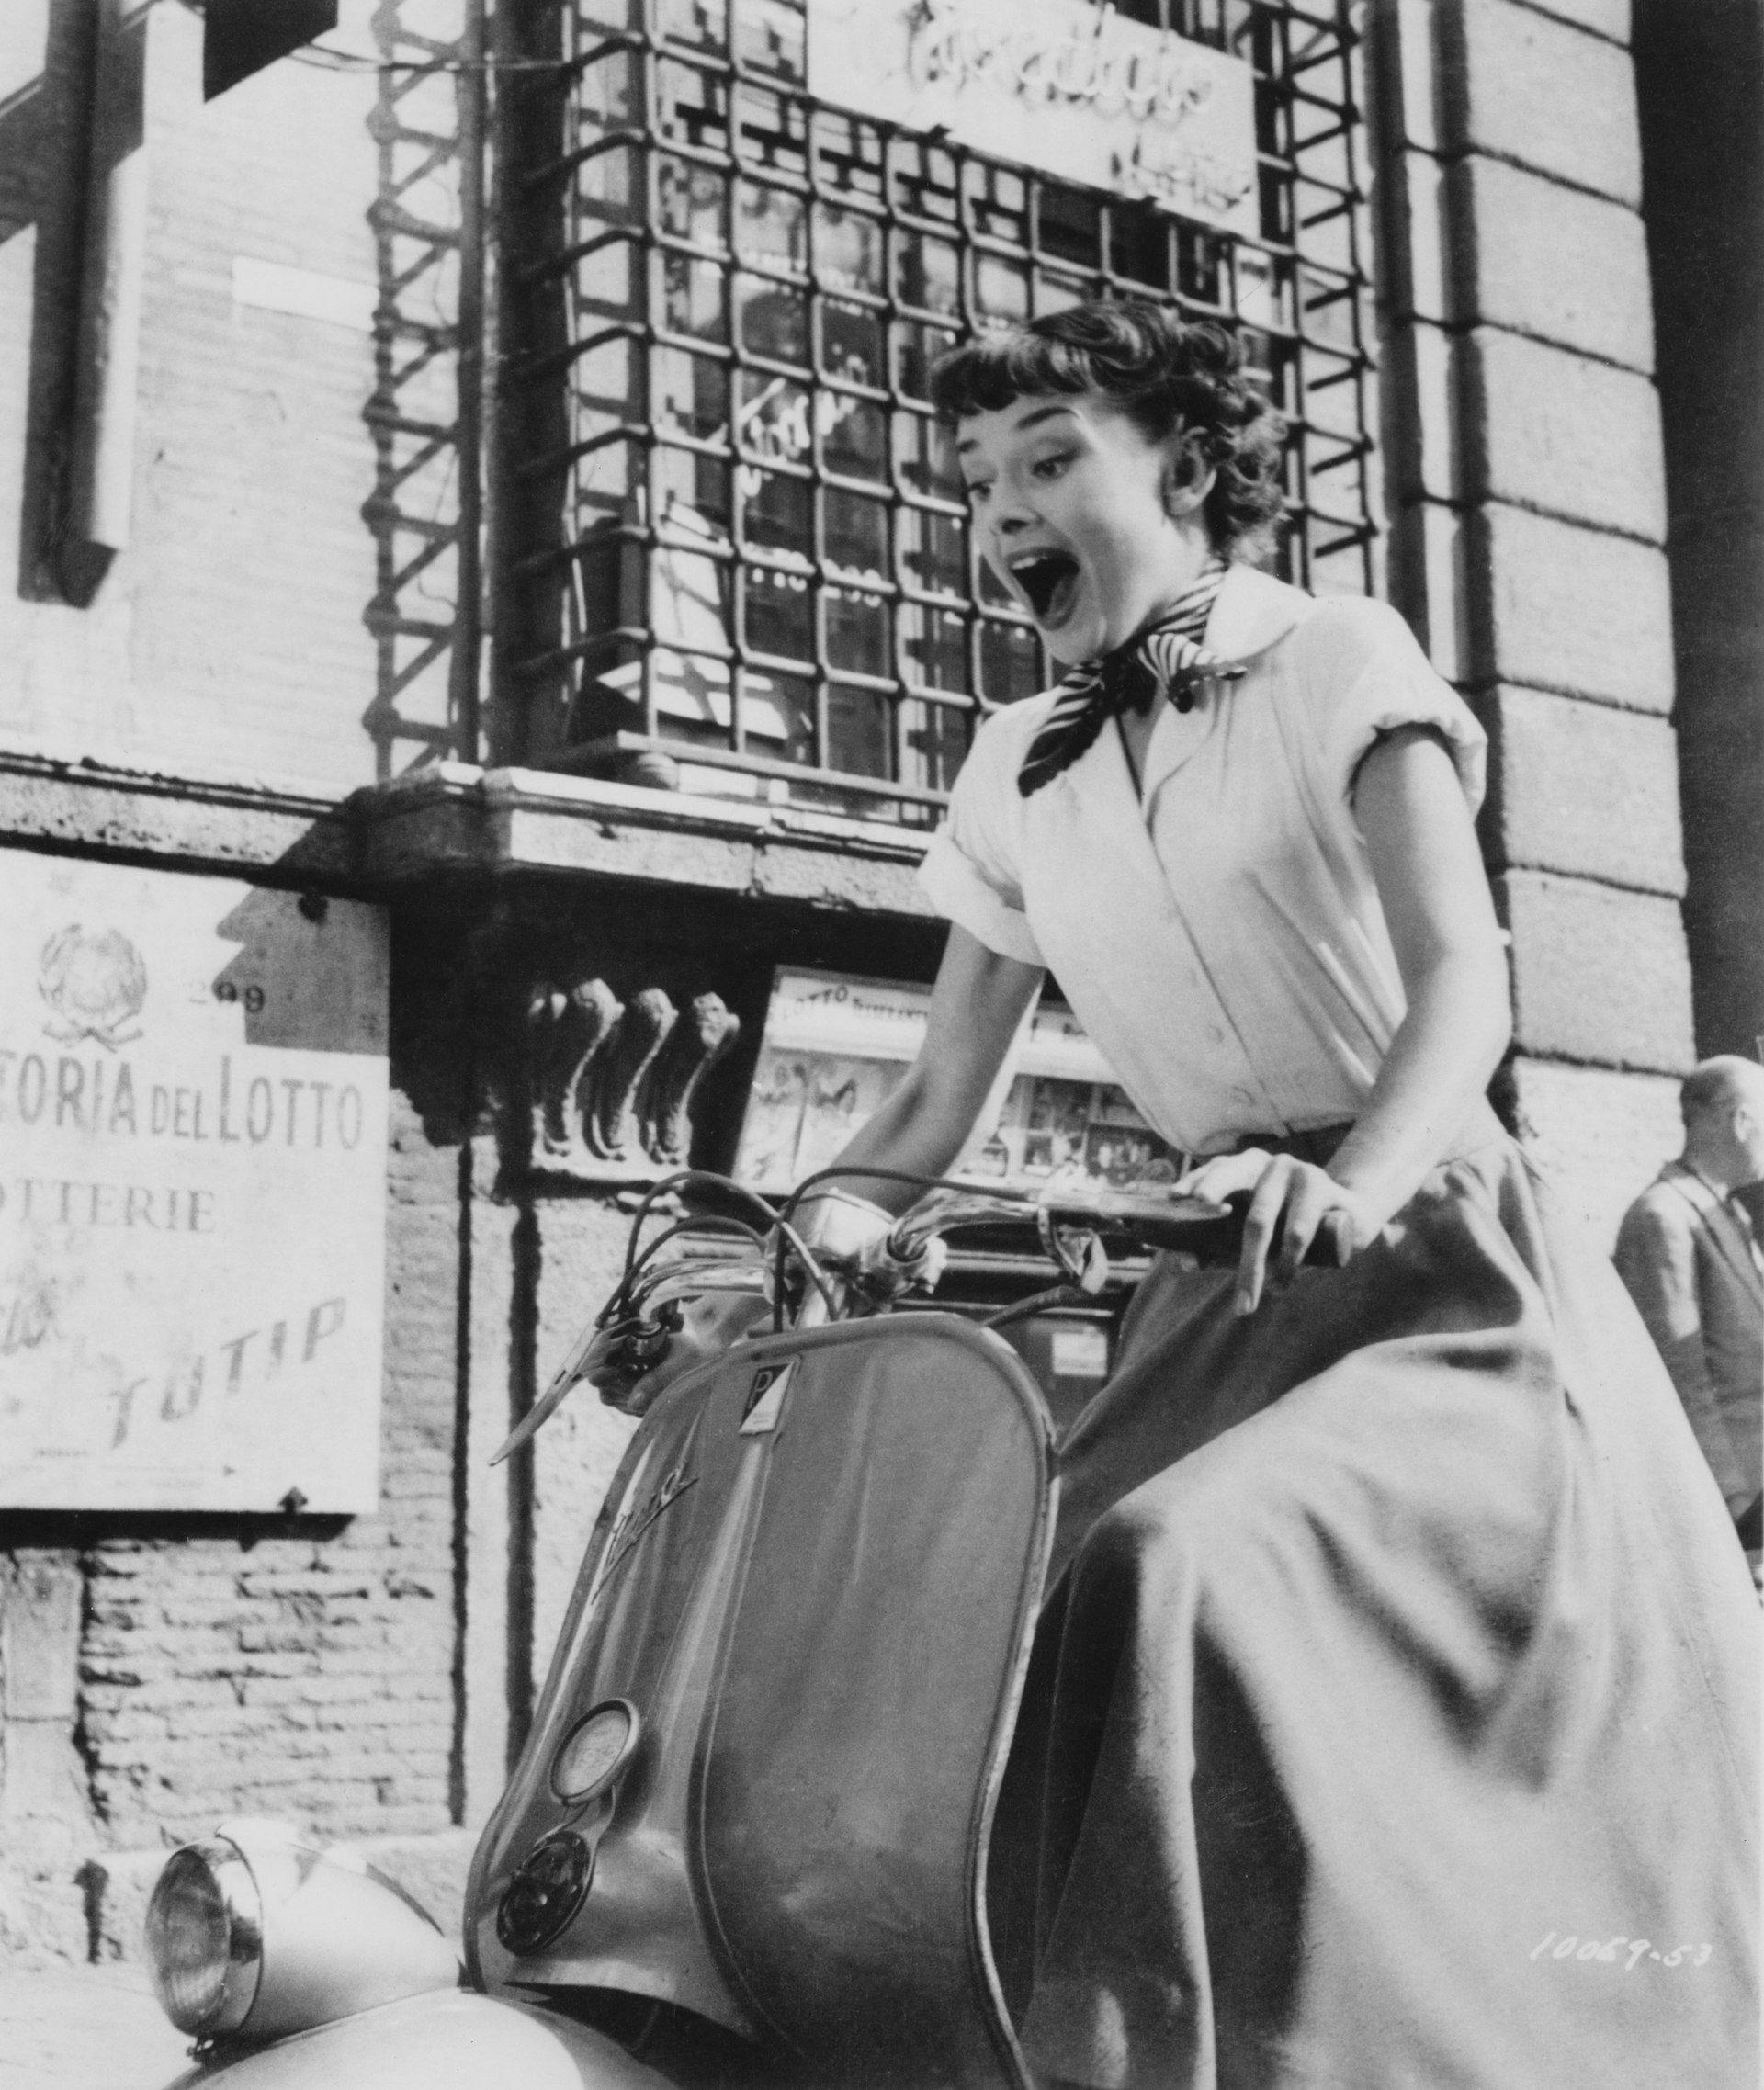 Belgian-born actress Audrey Hepburn (1929 - 1993) riding a motor scooter through Rome in a publicity still for 'Roman Holiday'